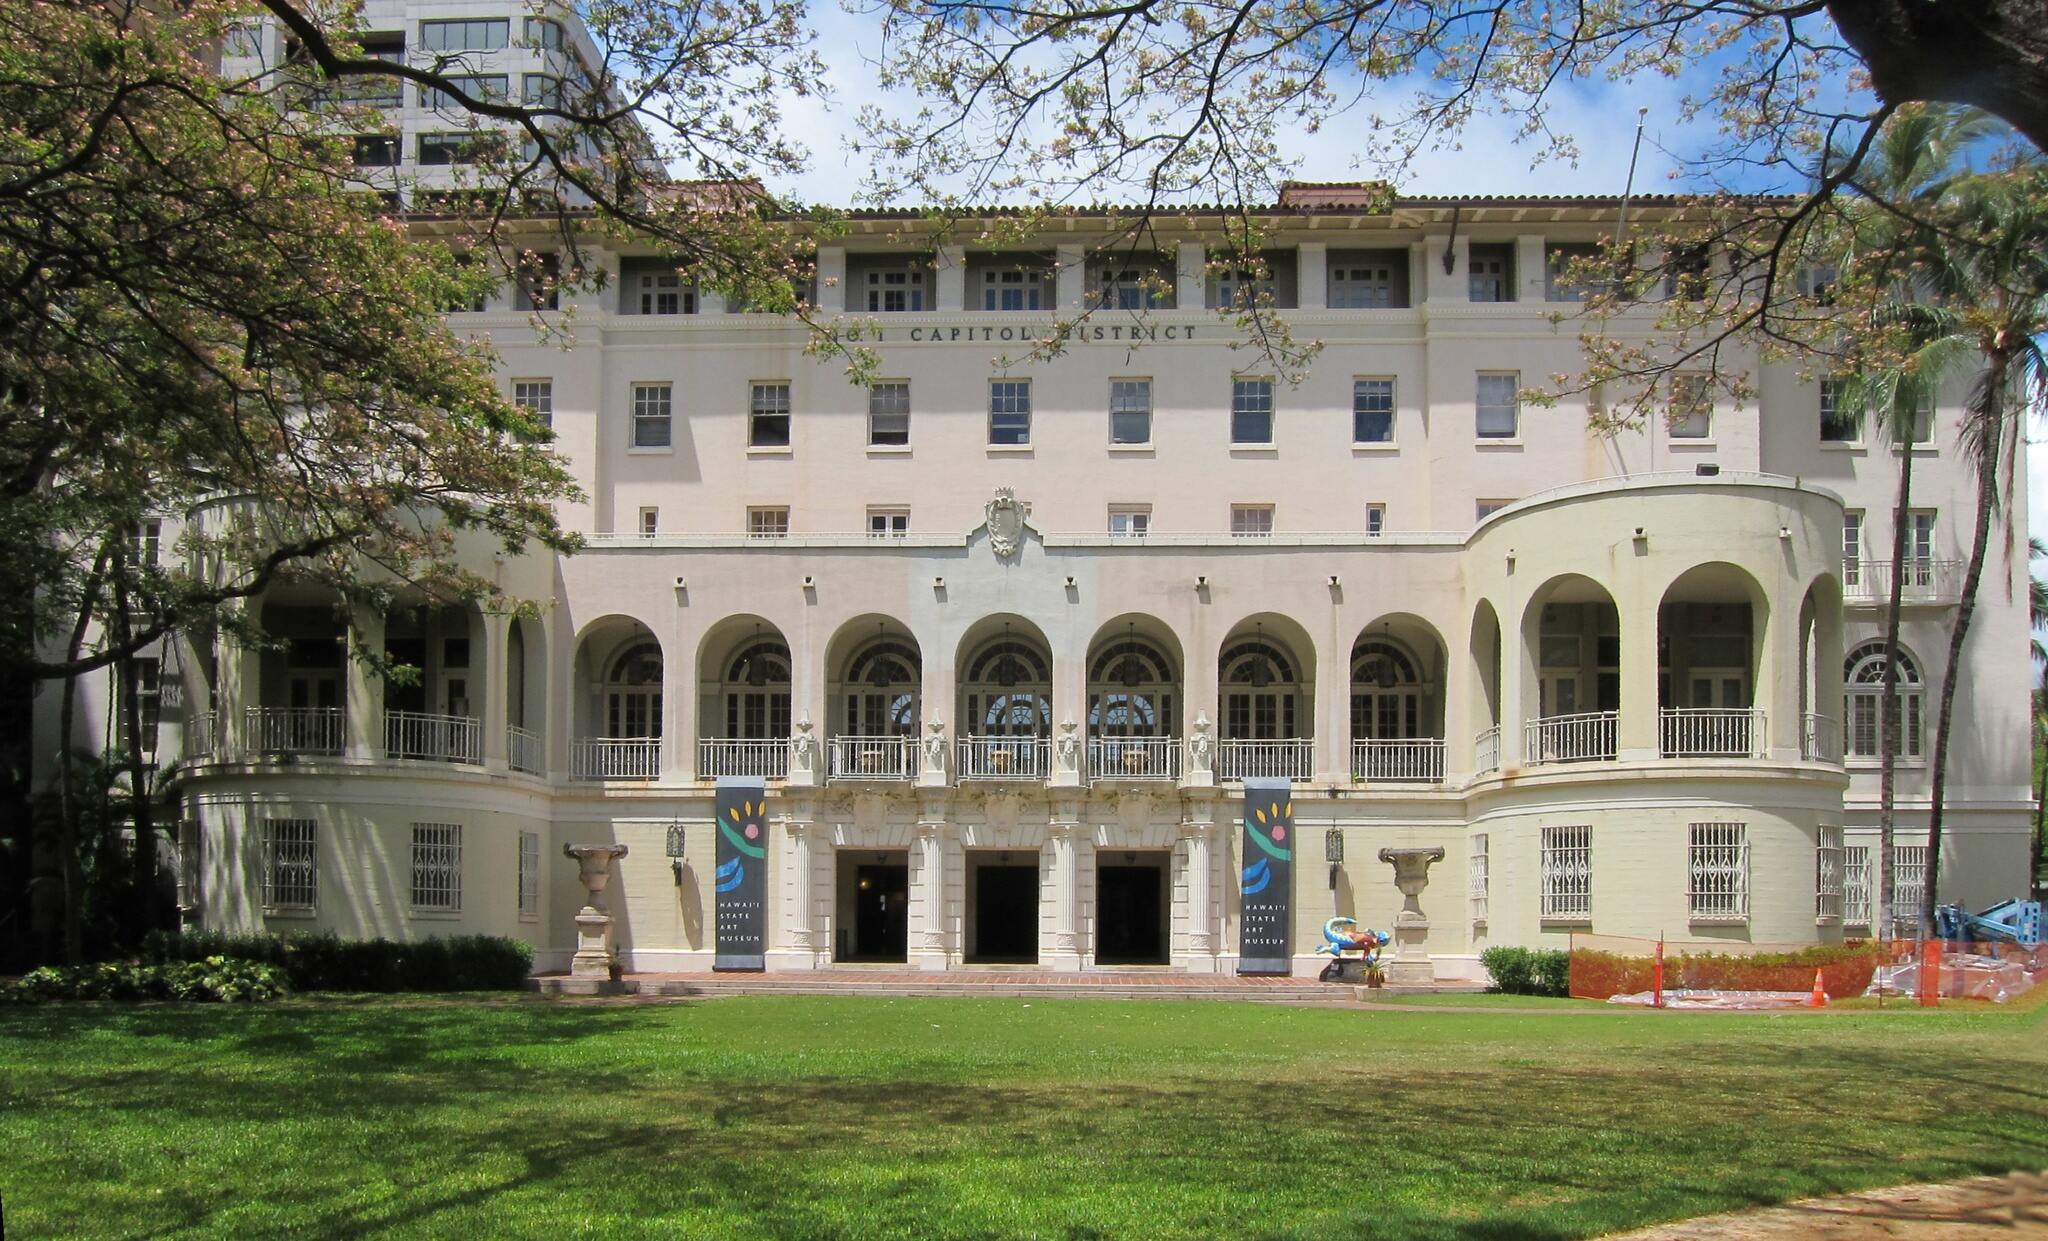 The Armed Services YMCA — No. 1 Capitol District Building (1928), in Honolulu, Hawaii.